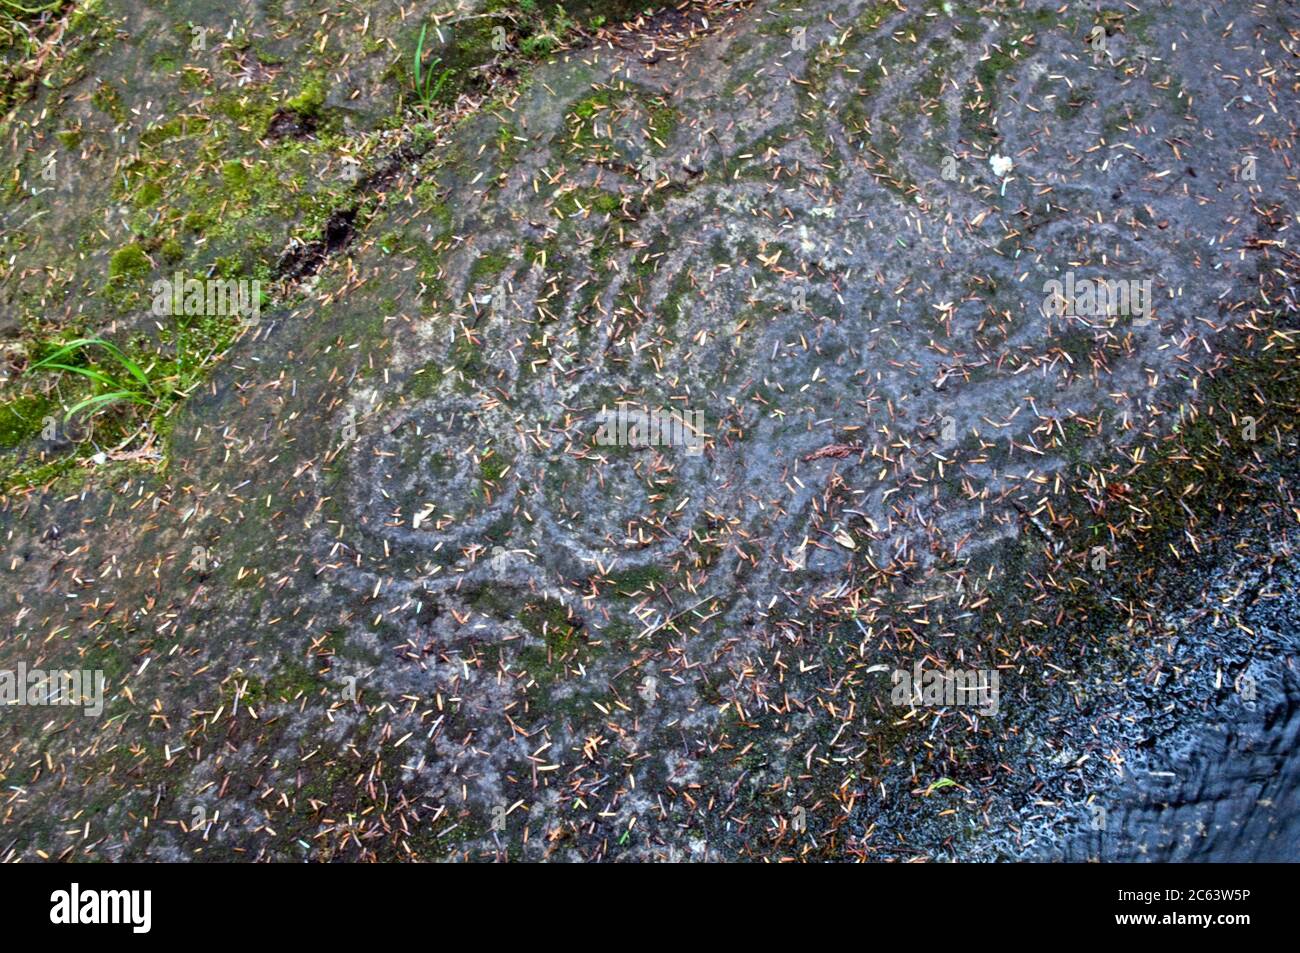 Ancient prehistoric petroglyph carved by indigenous First Nations people in the Great Bear Rainforest region, Bella Coola, British Columbia, Canada. Stock Photo